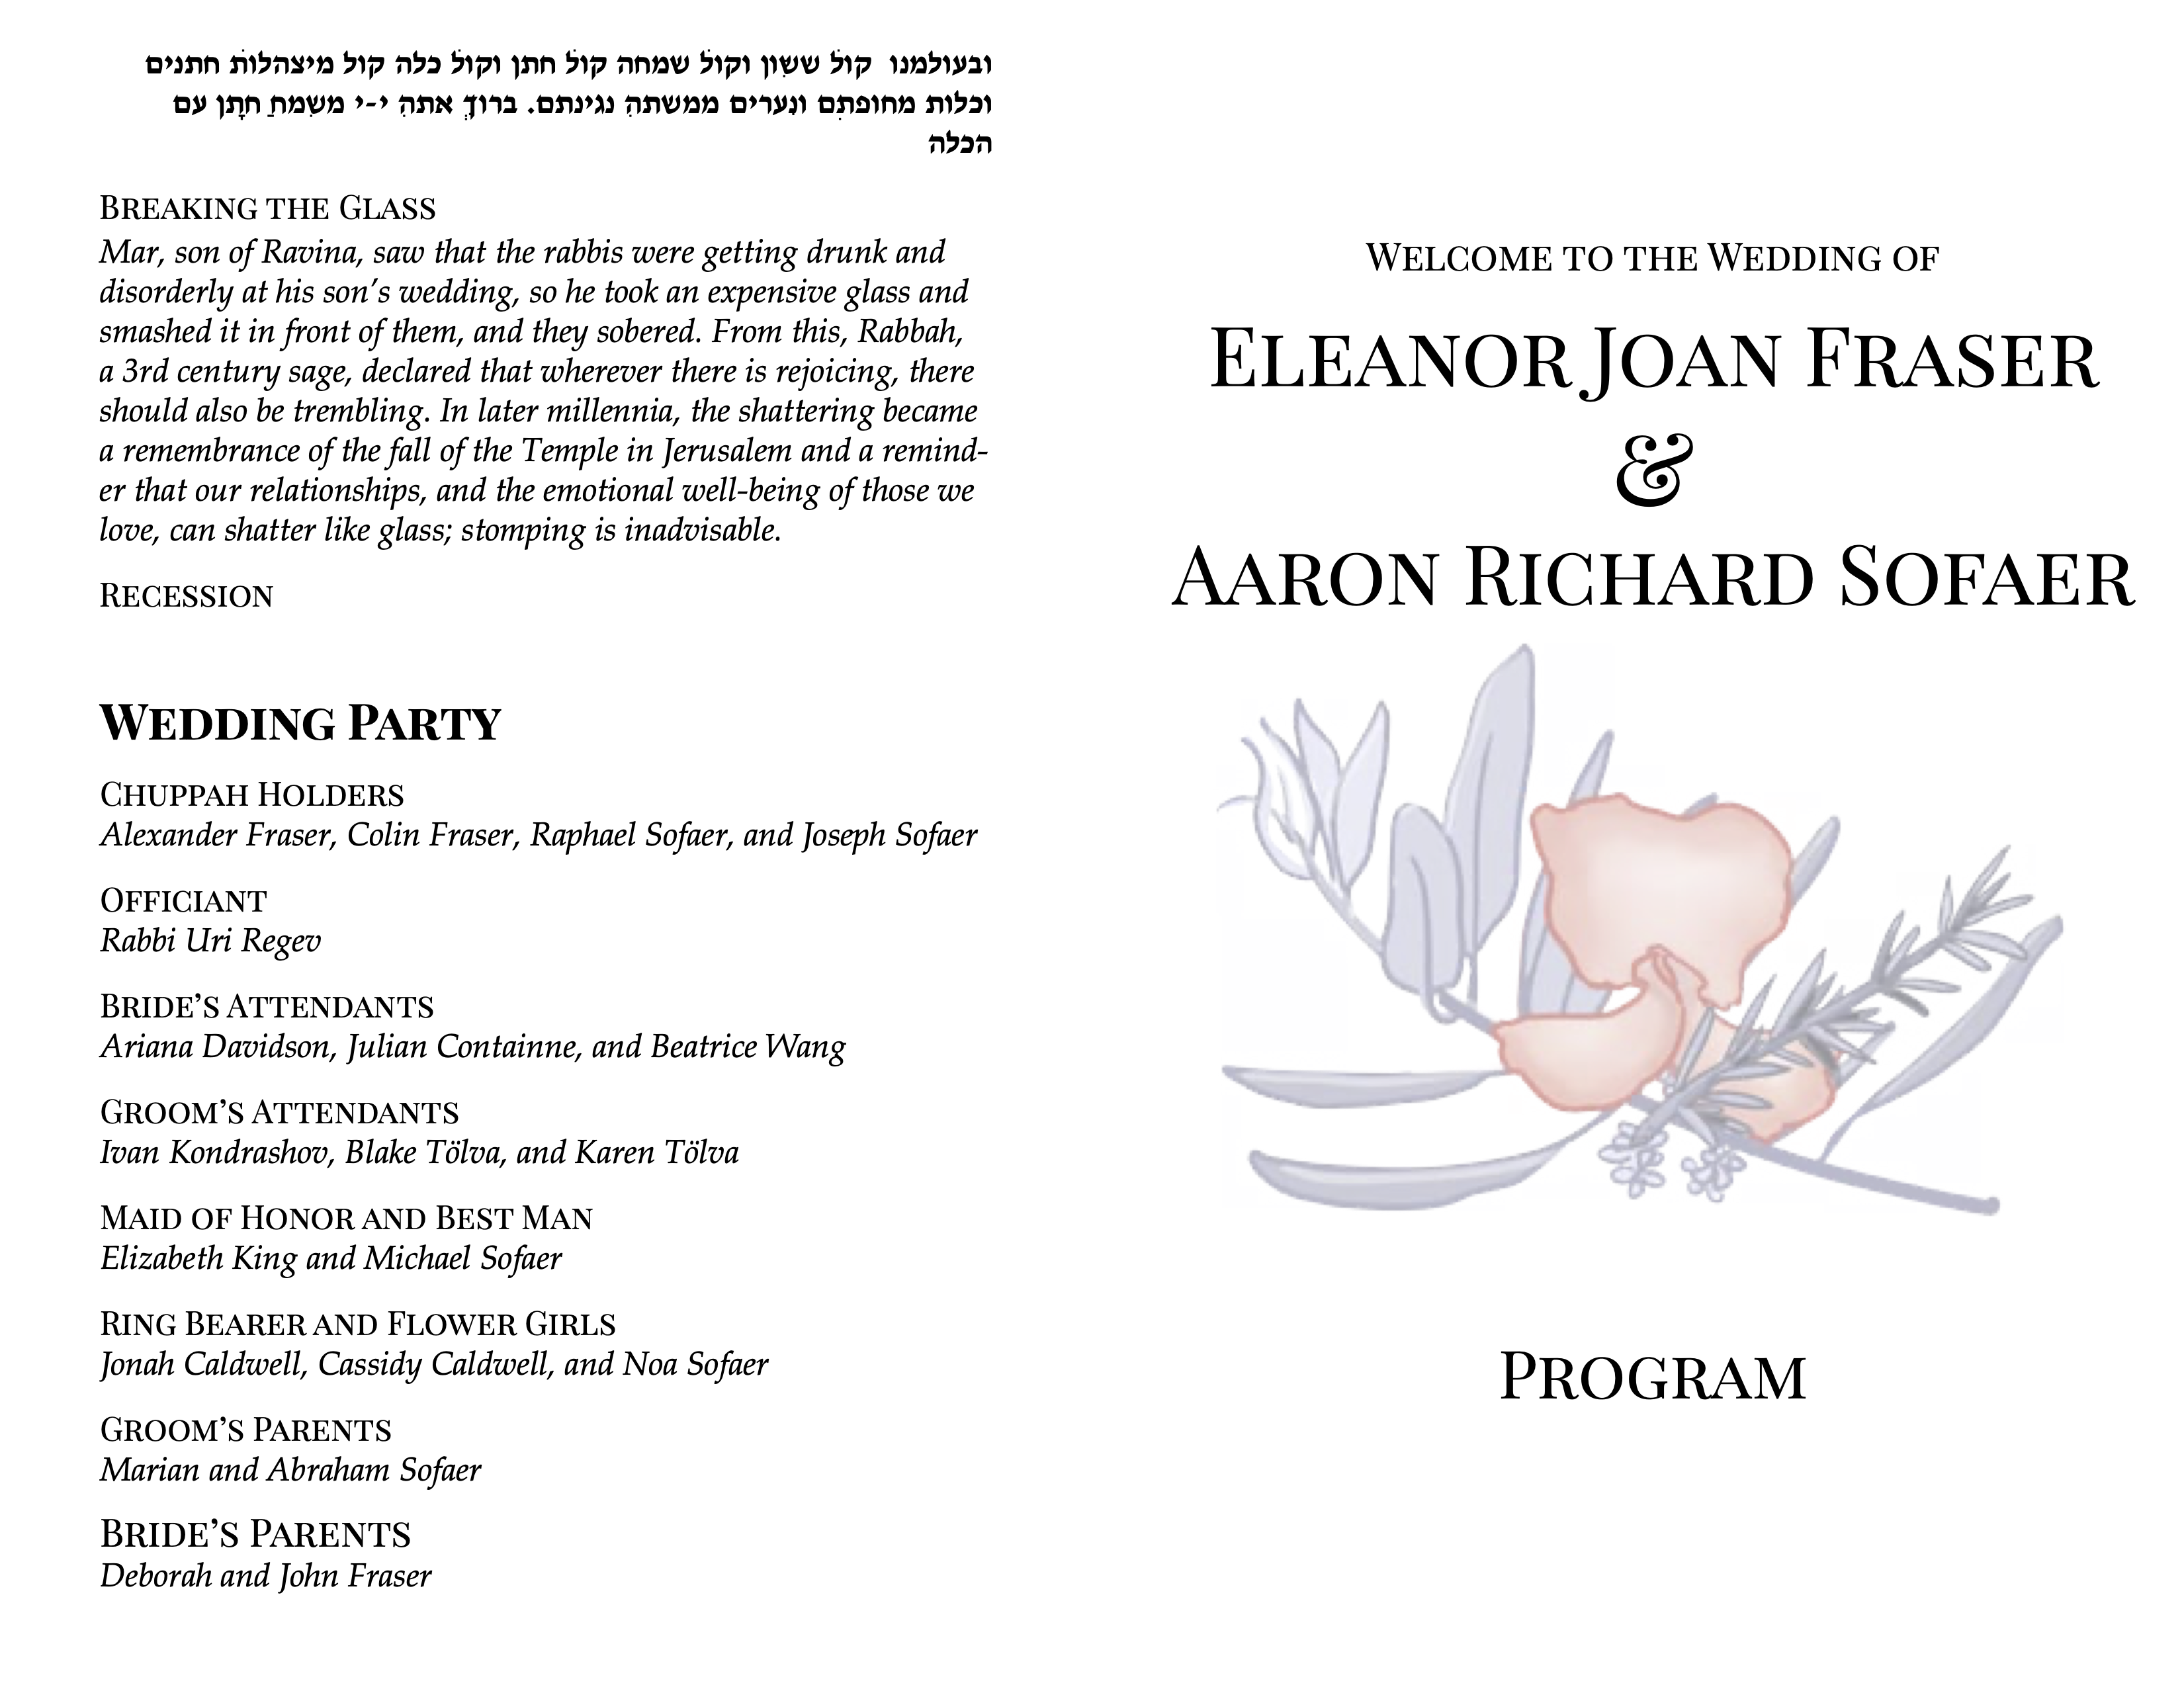 Front: Welcome to the Wedding of Eleanor Joan Fraser & Aaron Richard Sofaer, with drawing of a storm-blue olive branch and rosemary sprig and salmon sweet pea flower / Back: the final reading of the ceremony and a list of the wedding party members.